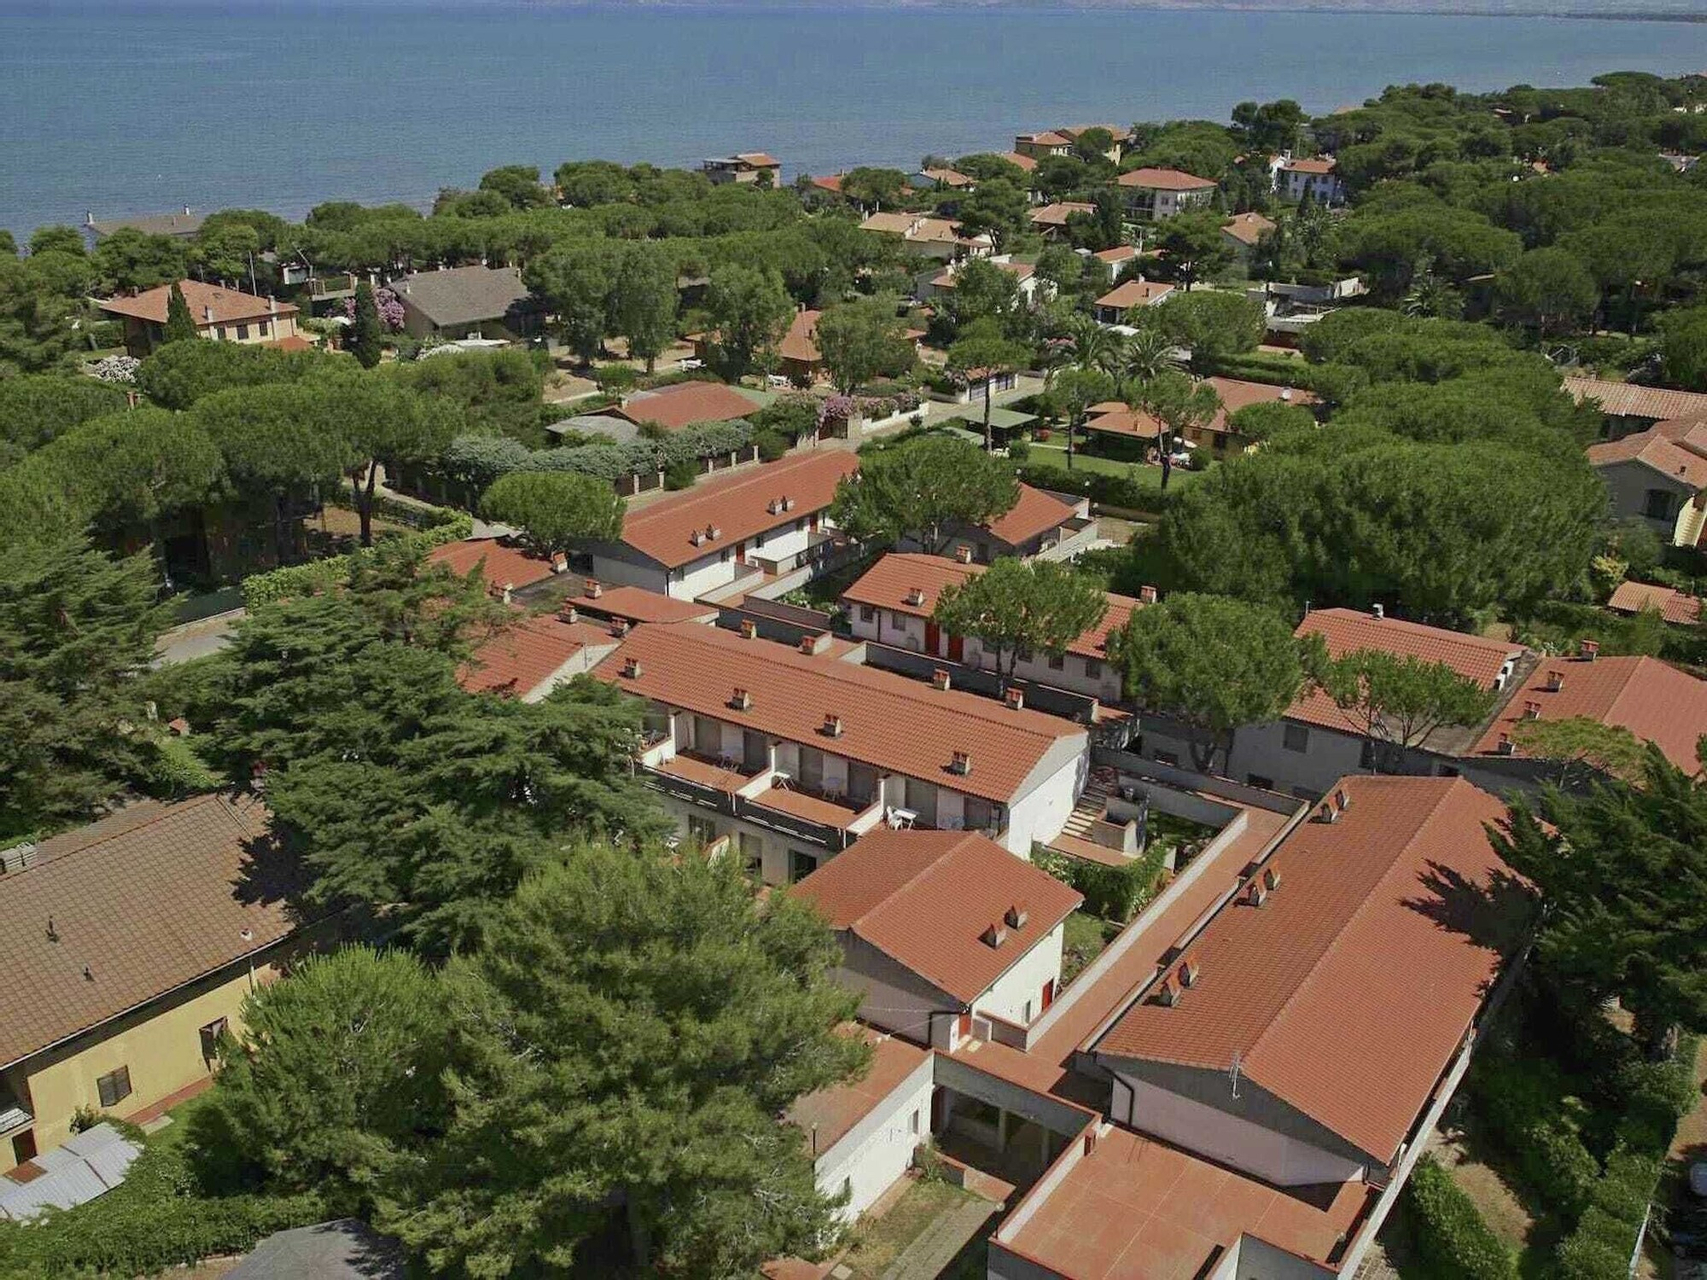 Exterior & Views 4, Lovely Holiday Home in Giannella near Beach, Grosseto